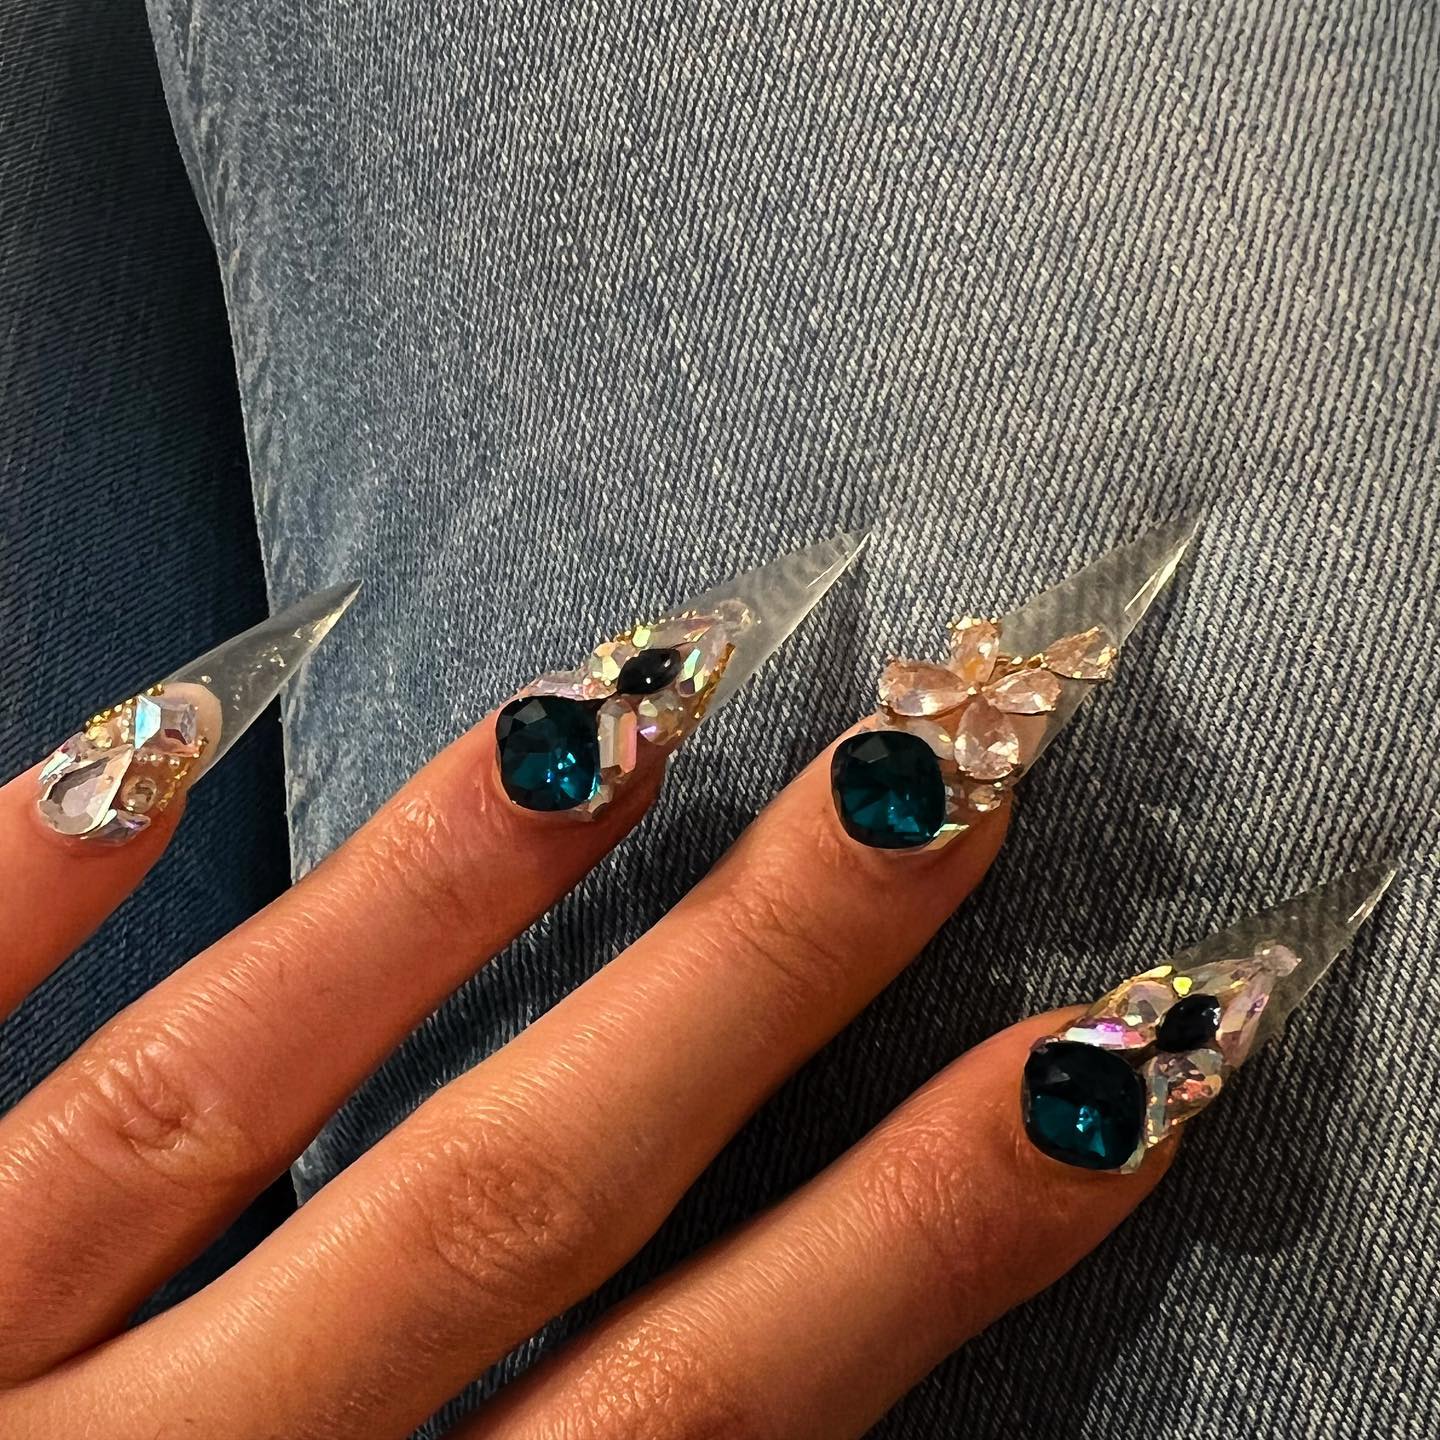 46 Amazing Prom Nails Designs - Queen's TOP 2023